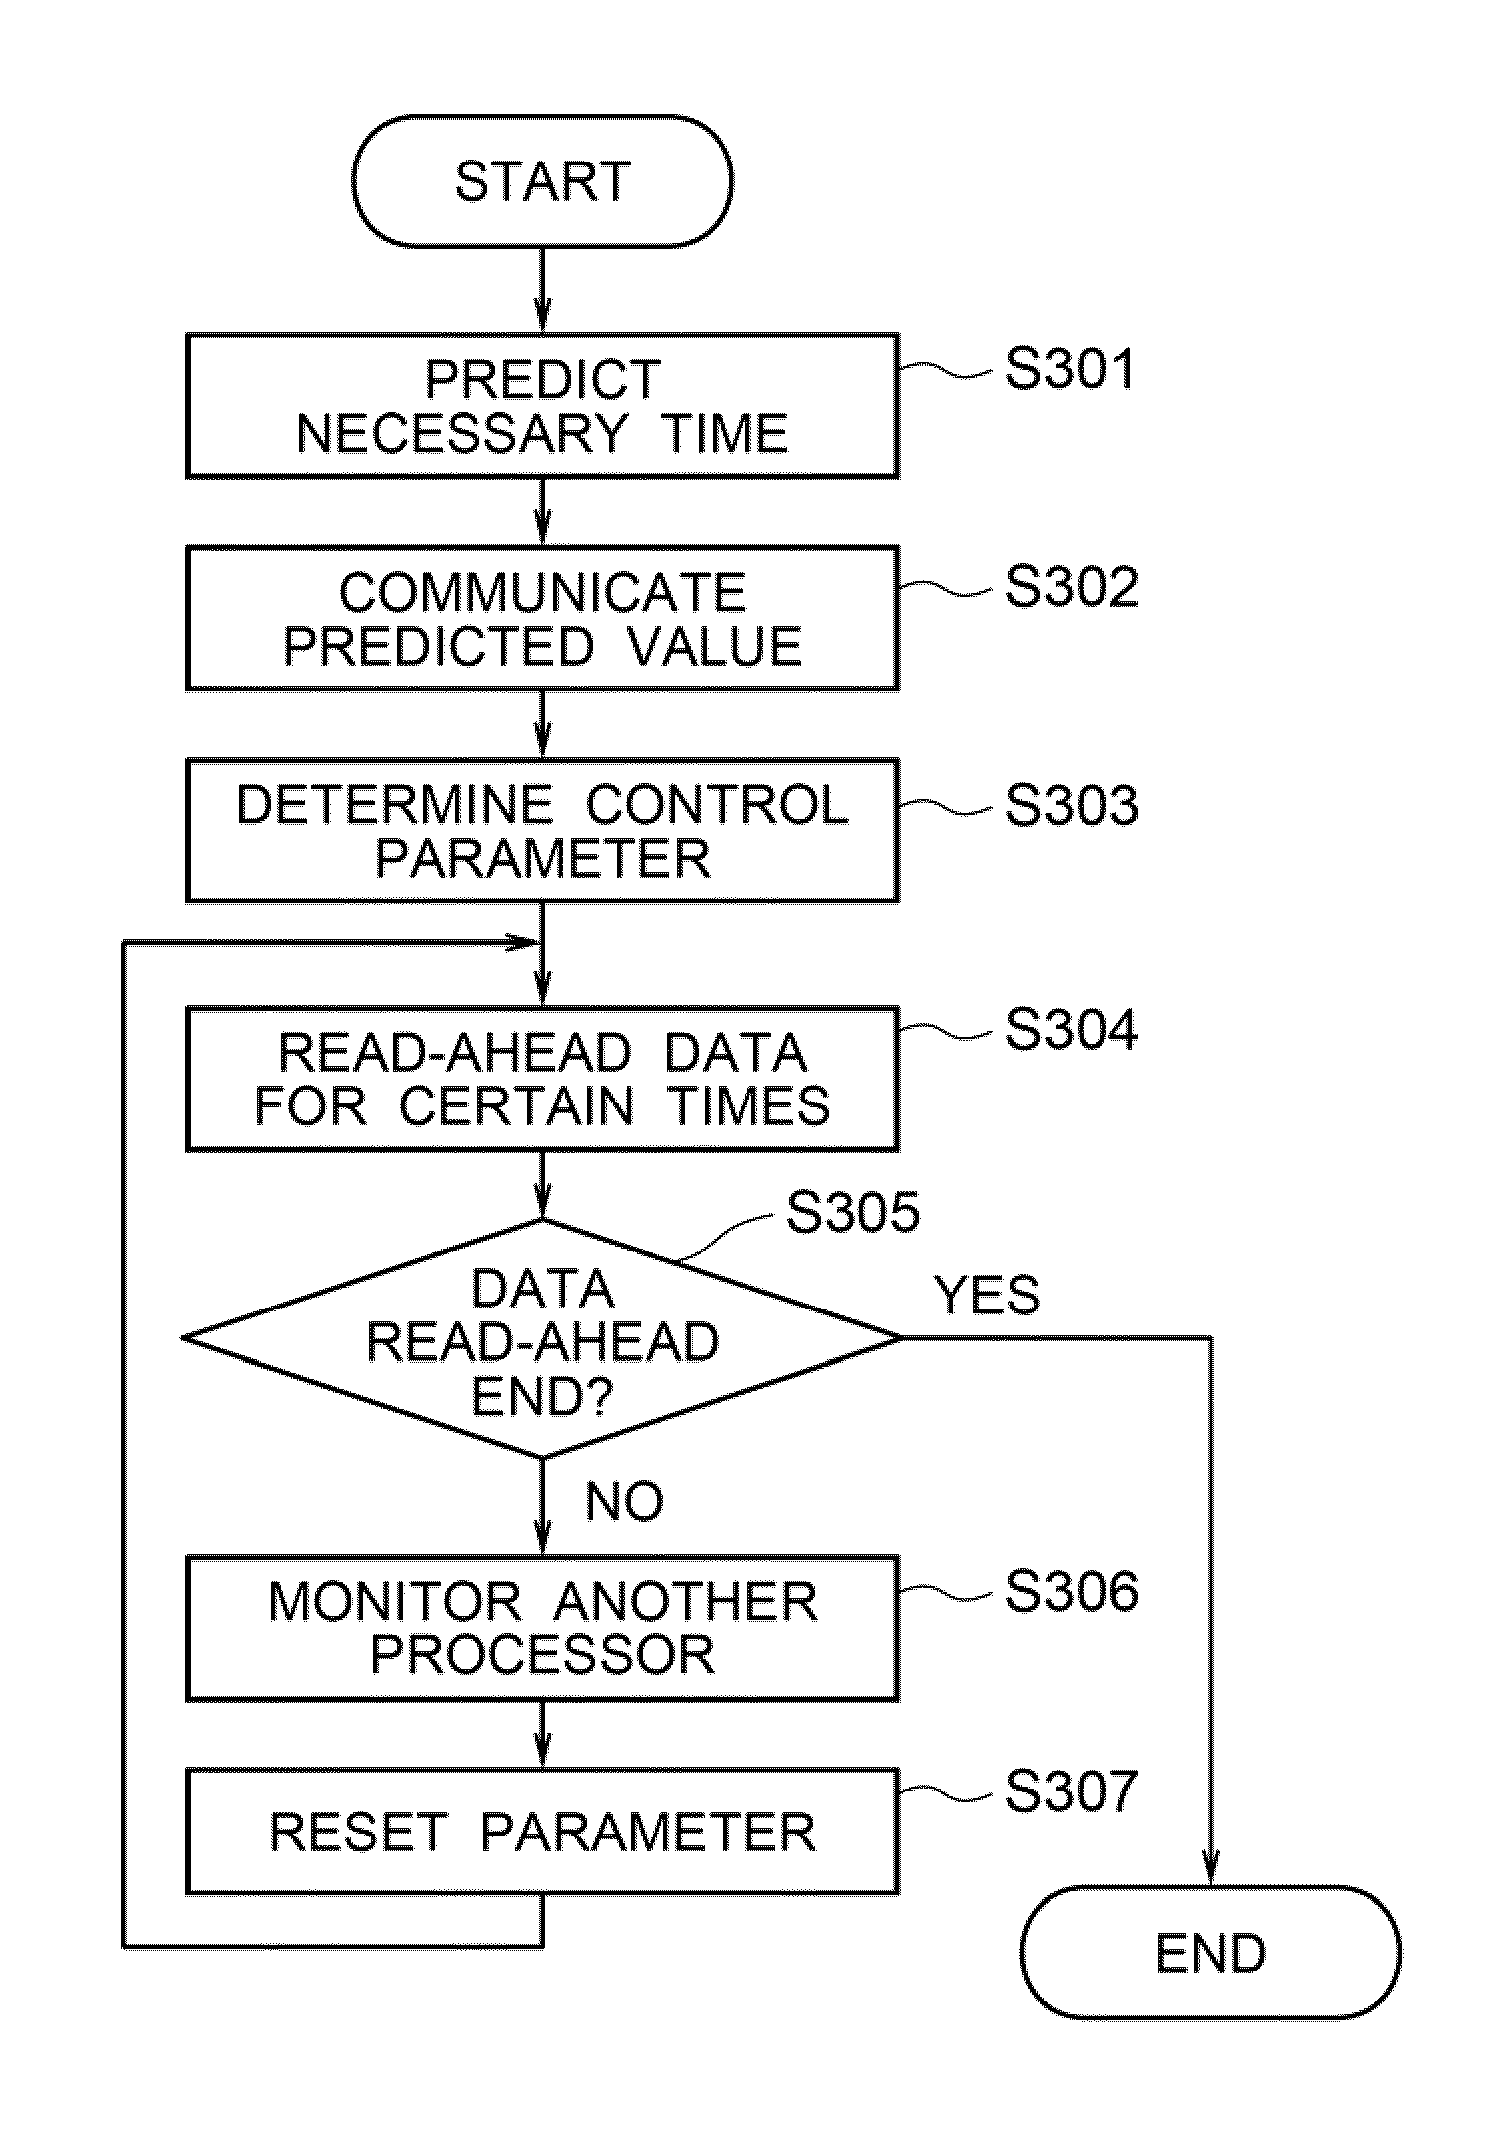 Memory access control system, memory access control method, and program thereof